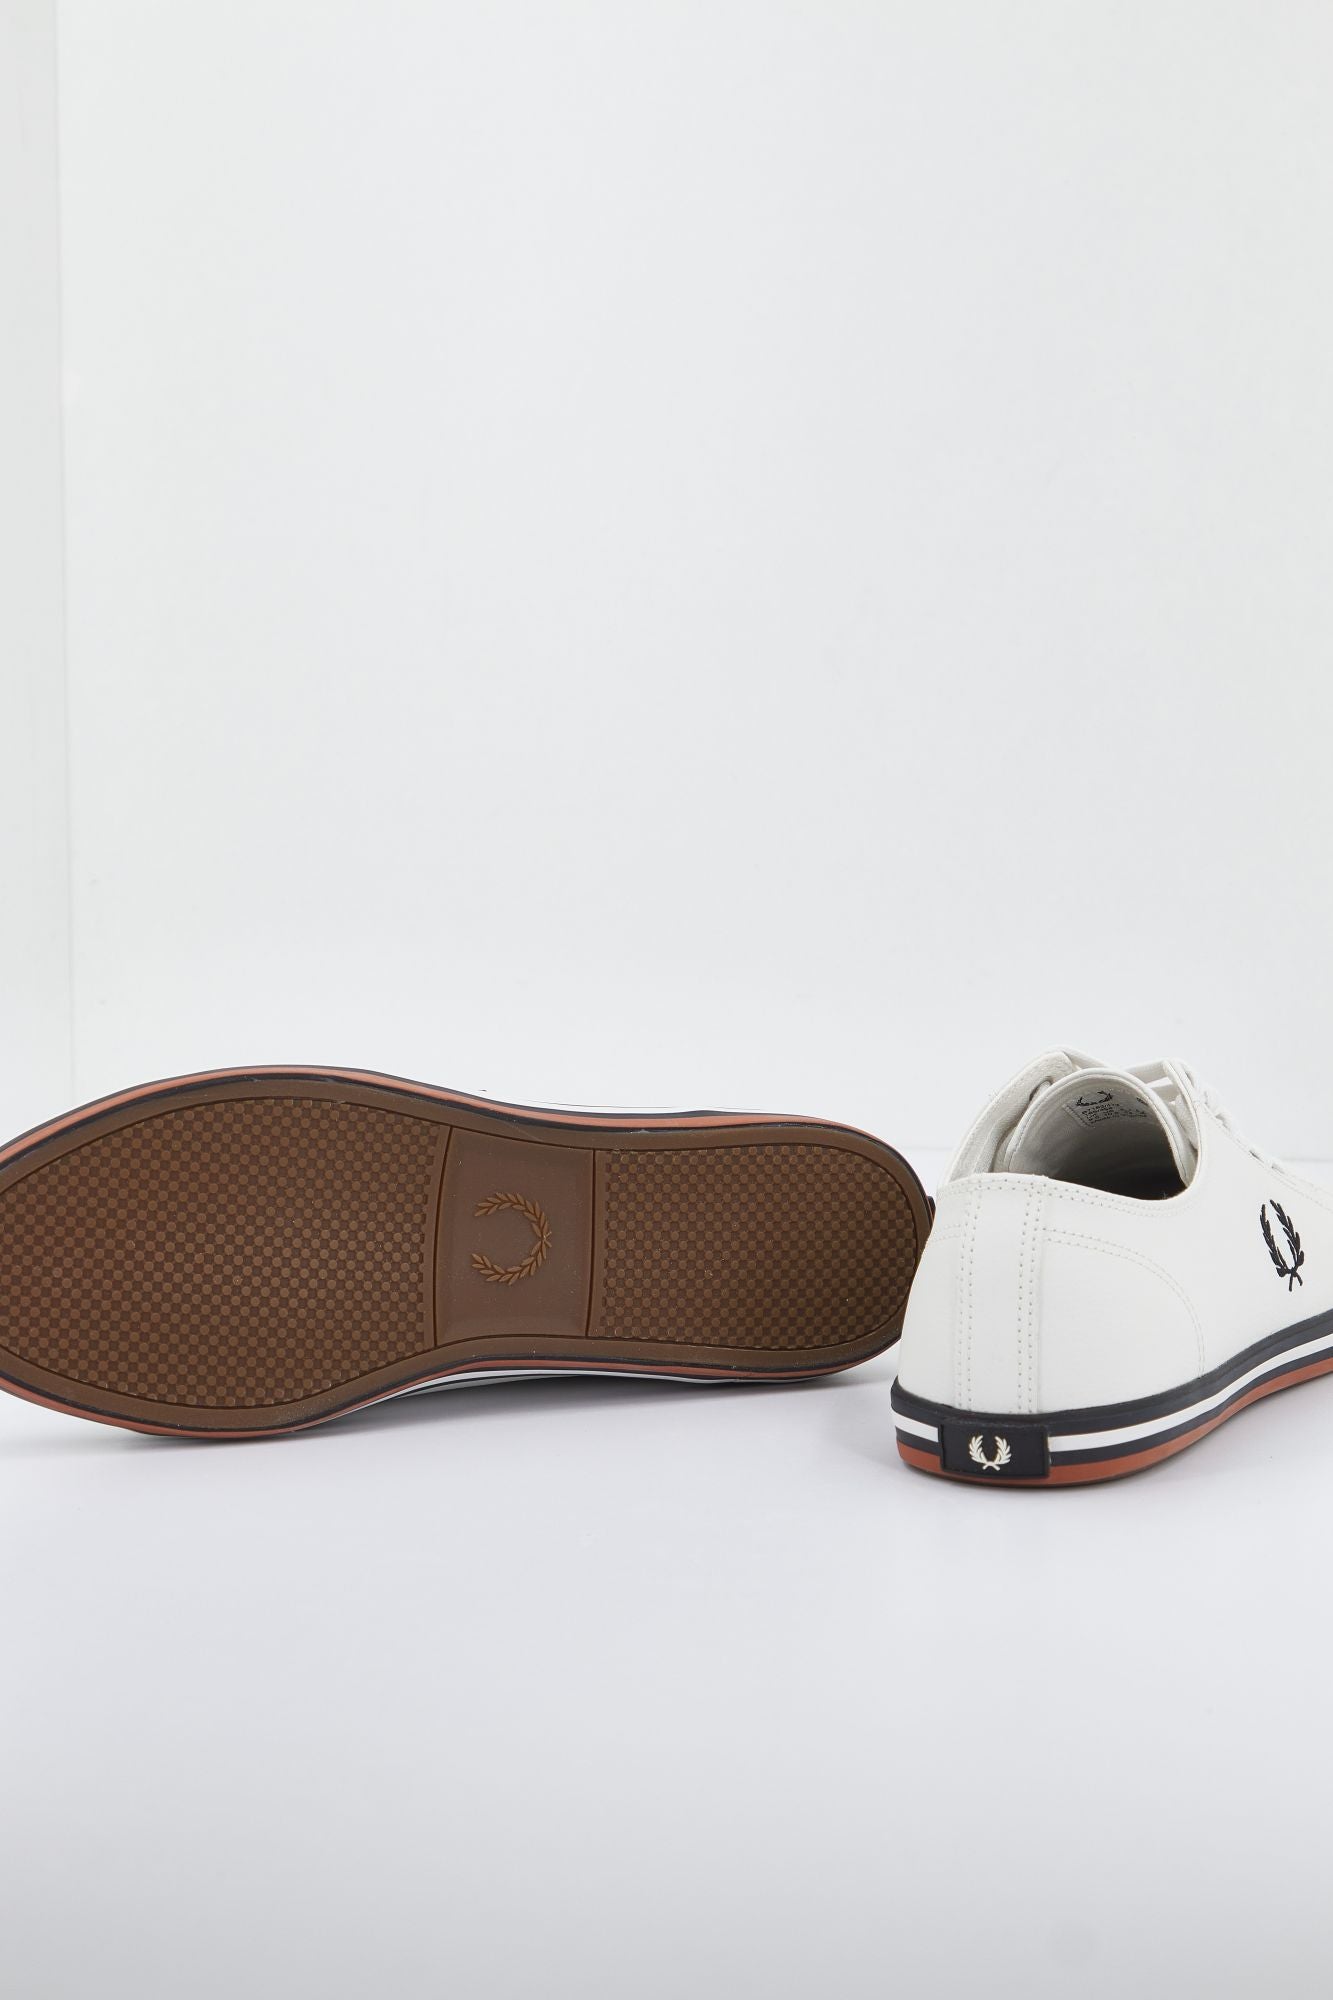 FRED PERRY  KINGSTON LEATHER en color BLANCO (3)